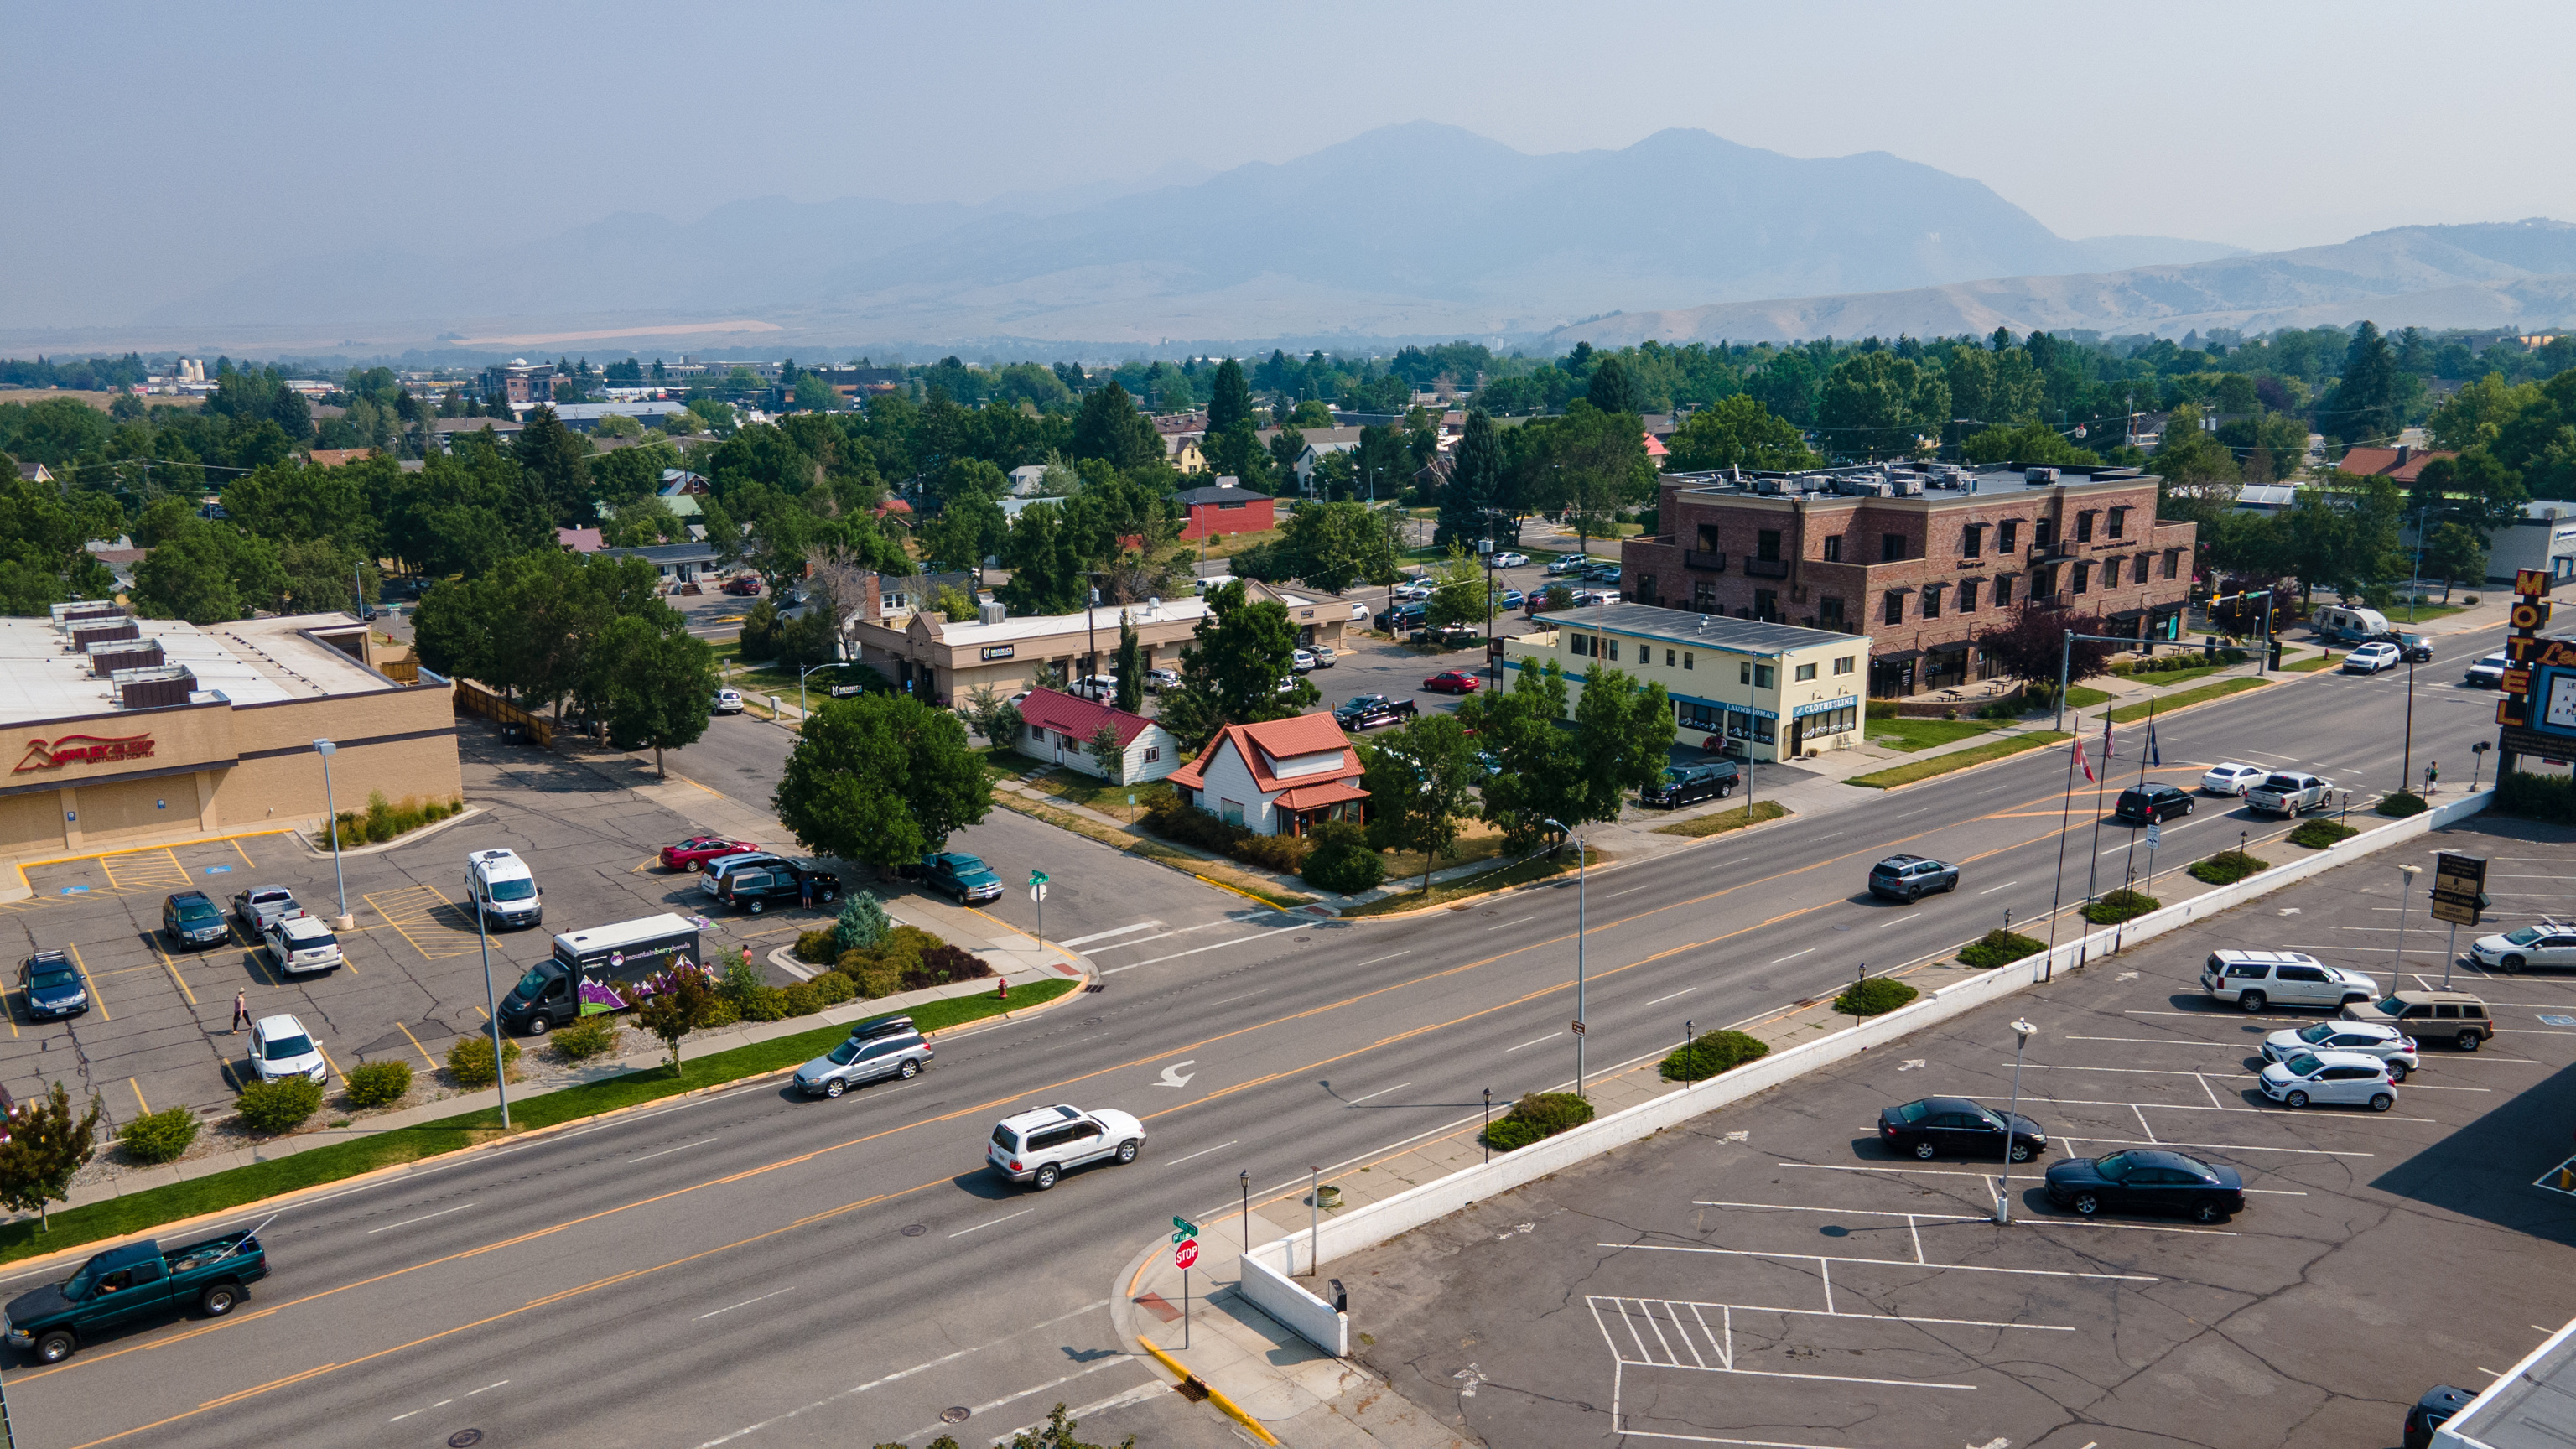 B-2M Zoning building in high traffic area, downtown Bozeman for sale